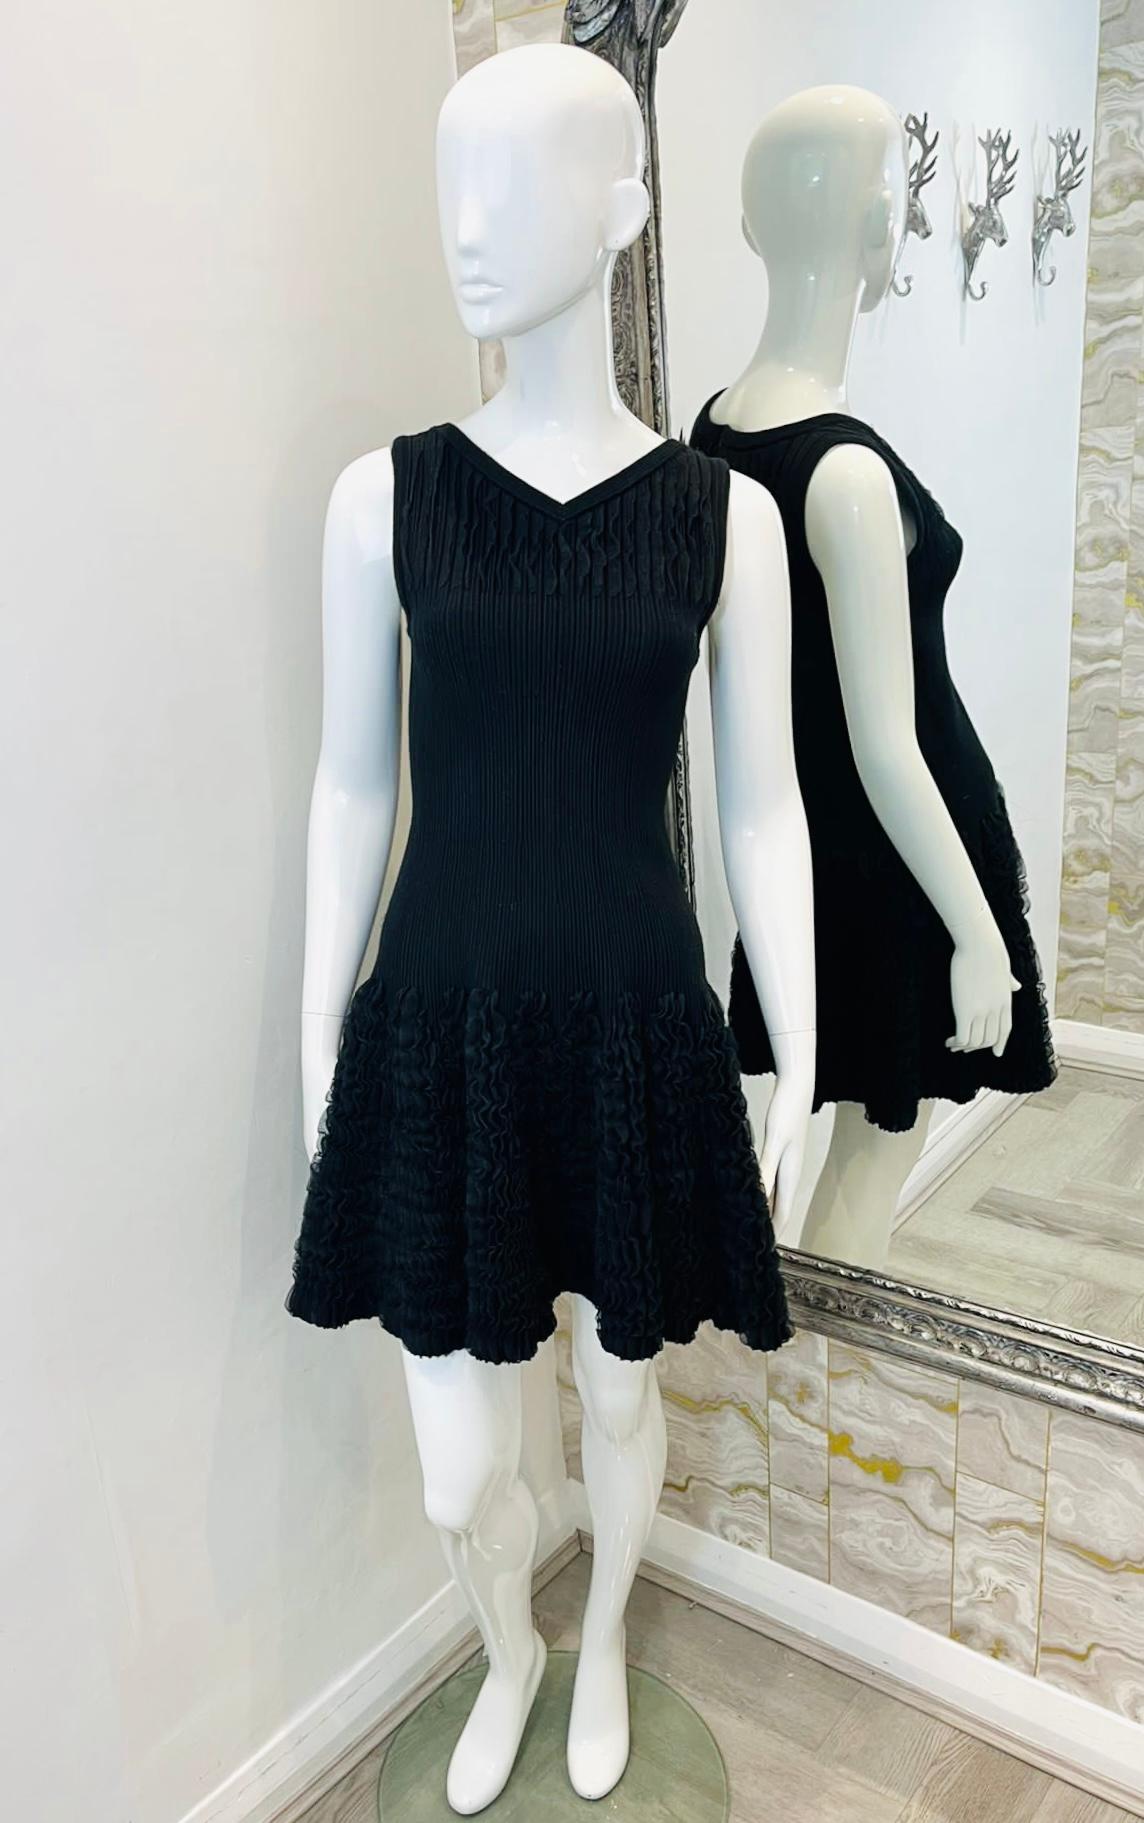 Alaia Textured Wool Dress

Black mini, sleeveless dress crafted in a flared silhouette.

Featuring textured design to the V-Neckline and skirt.

Detailed with sleeveless style and concealed zip fastening to rear.

Size – 40IT

Condition – Very